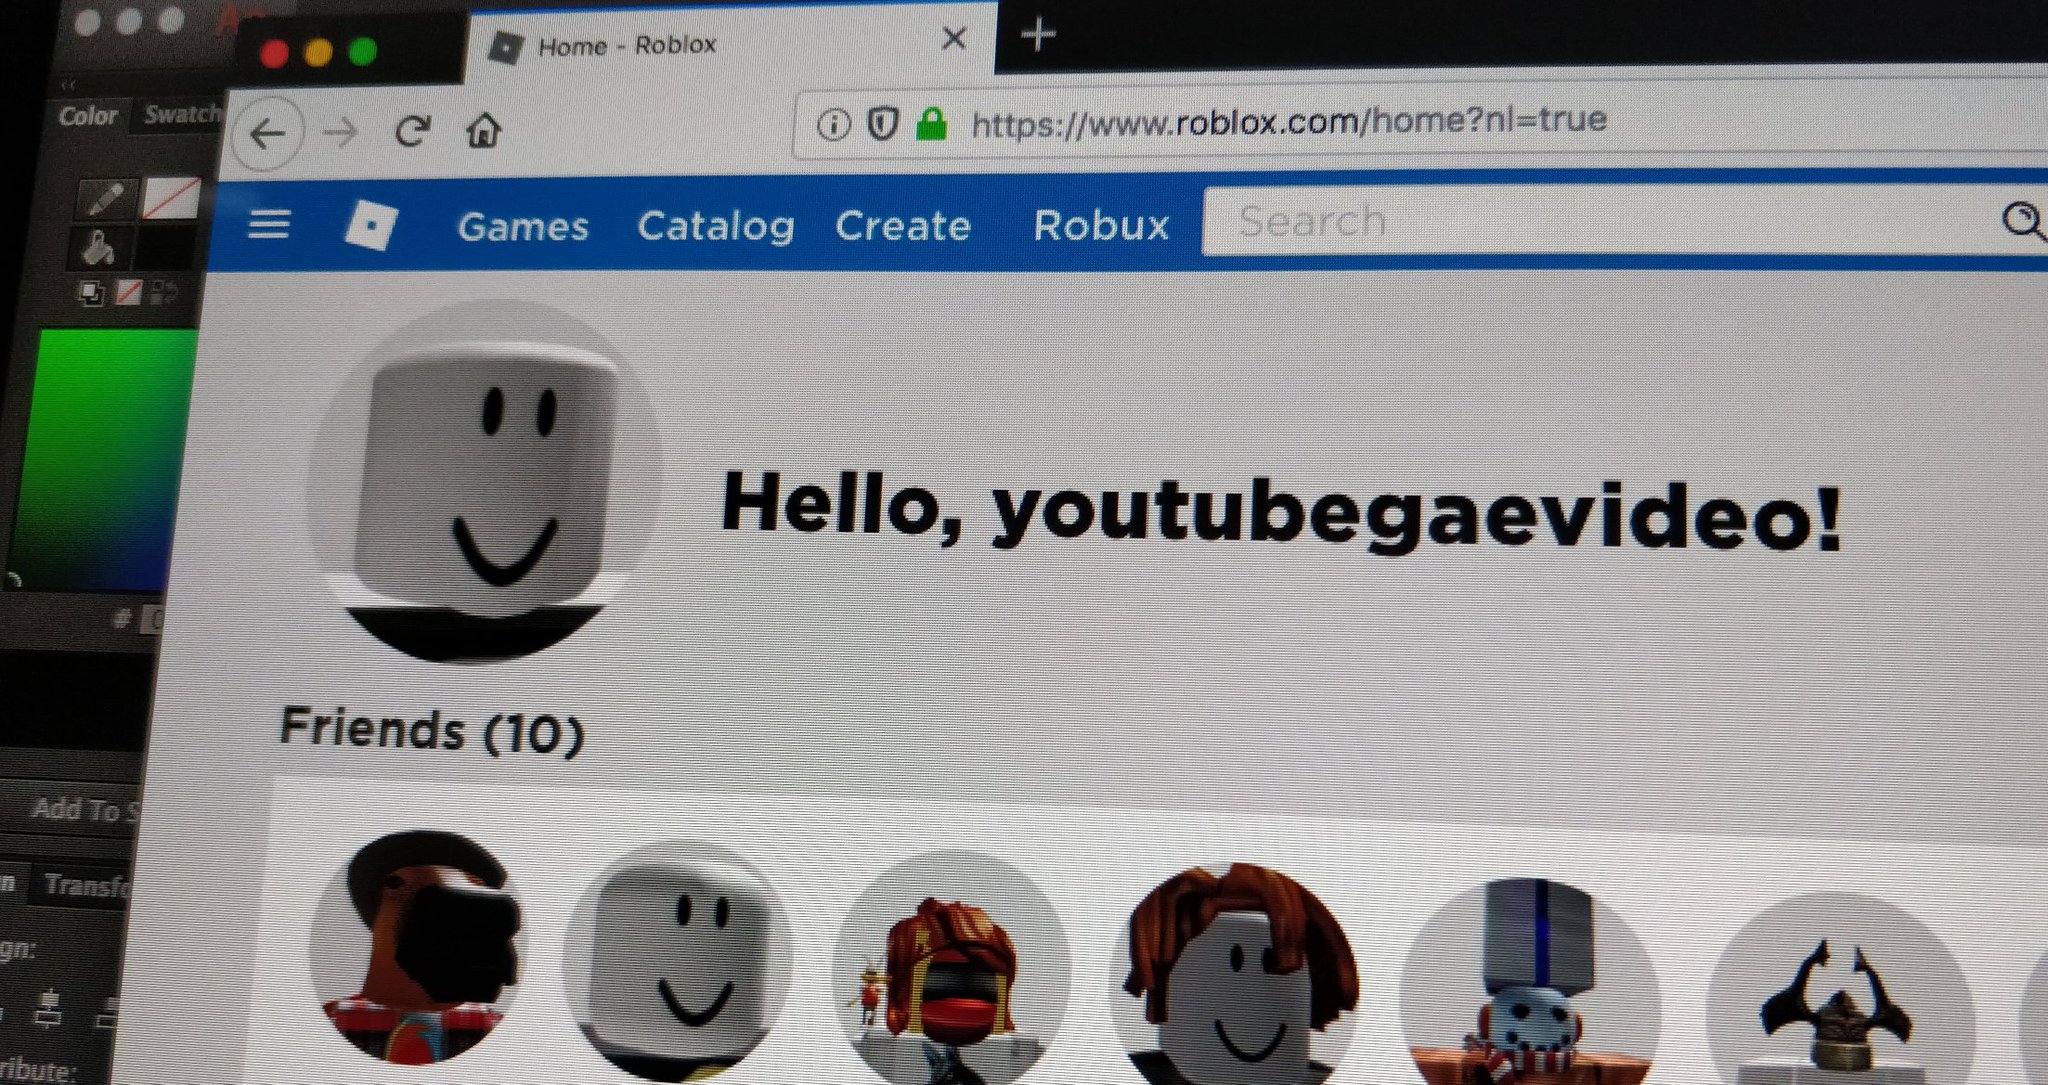 Notglacier On Twitter One Of These Is My Actual Account - roblox home nl true